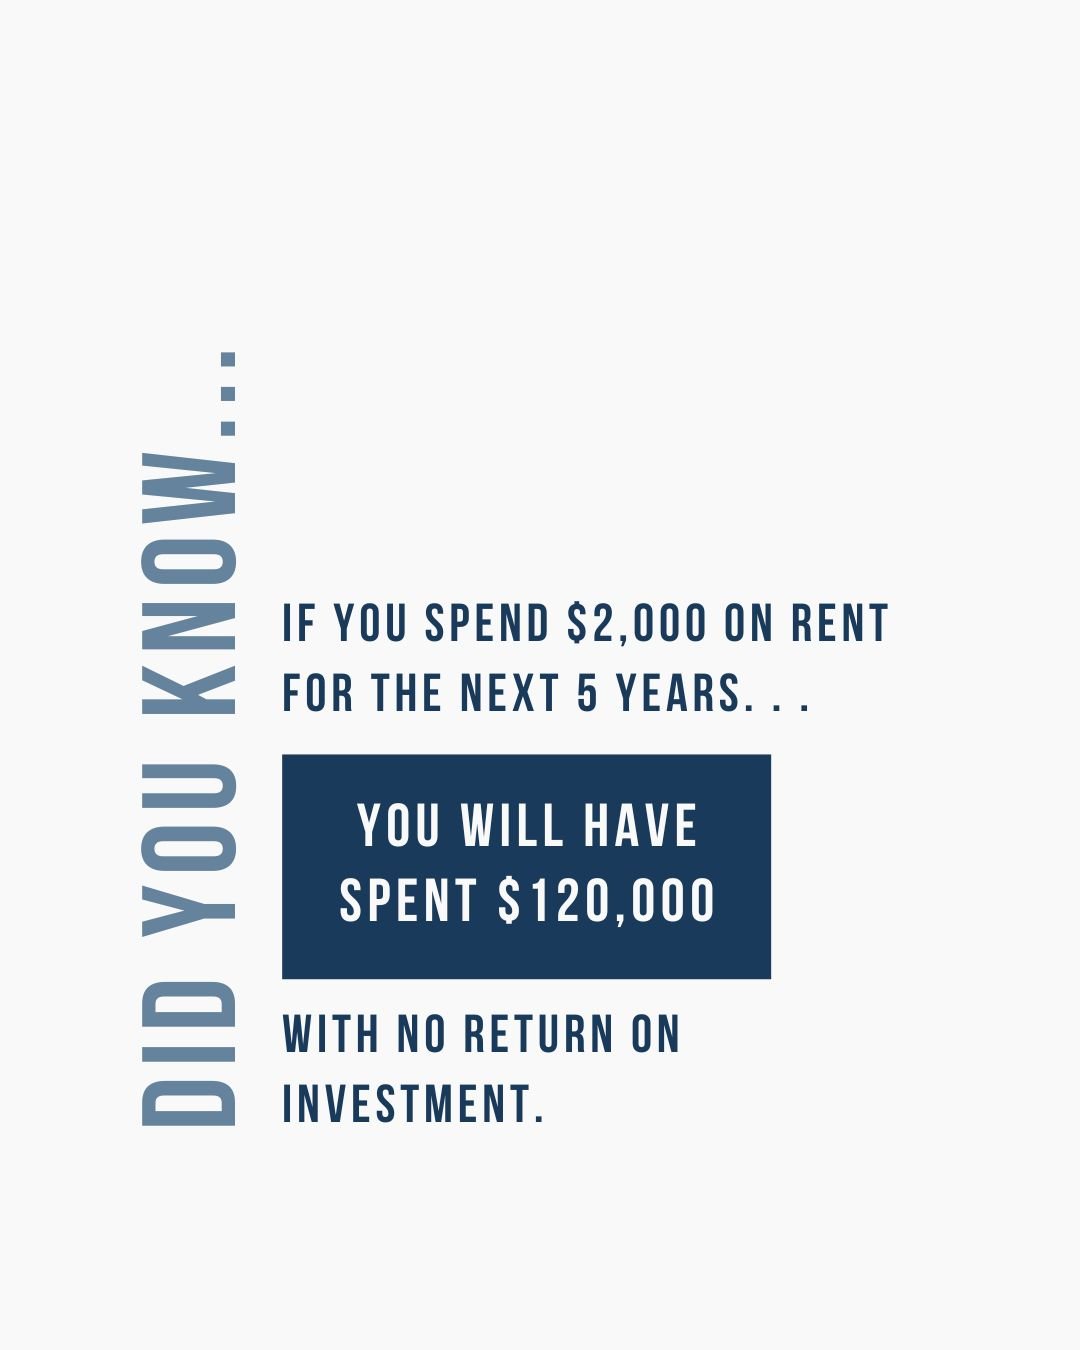 Renting adds up&hellip; In a bad way. 

It&rsquo;s hard to see the numbers like this because you can take a reasonable rent ($2,000) and a reasonable amount of time (5 years) and suddenly $120,000 has disappeared into your landlord&rsquo;s pocket. 

